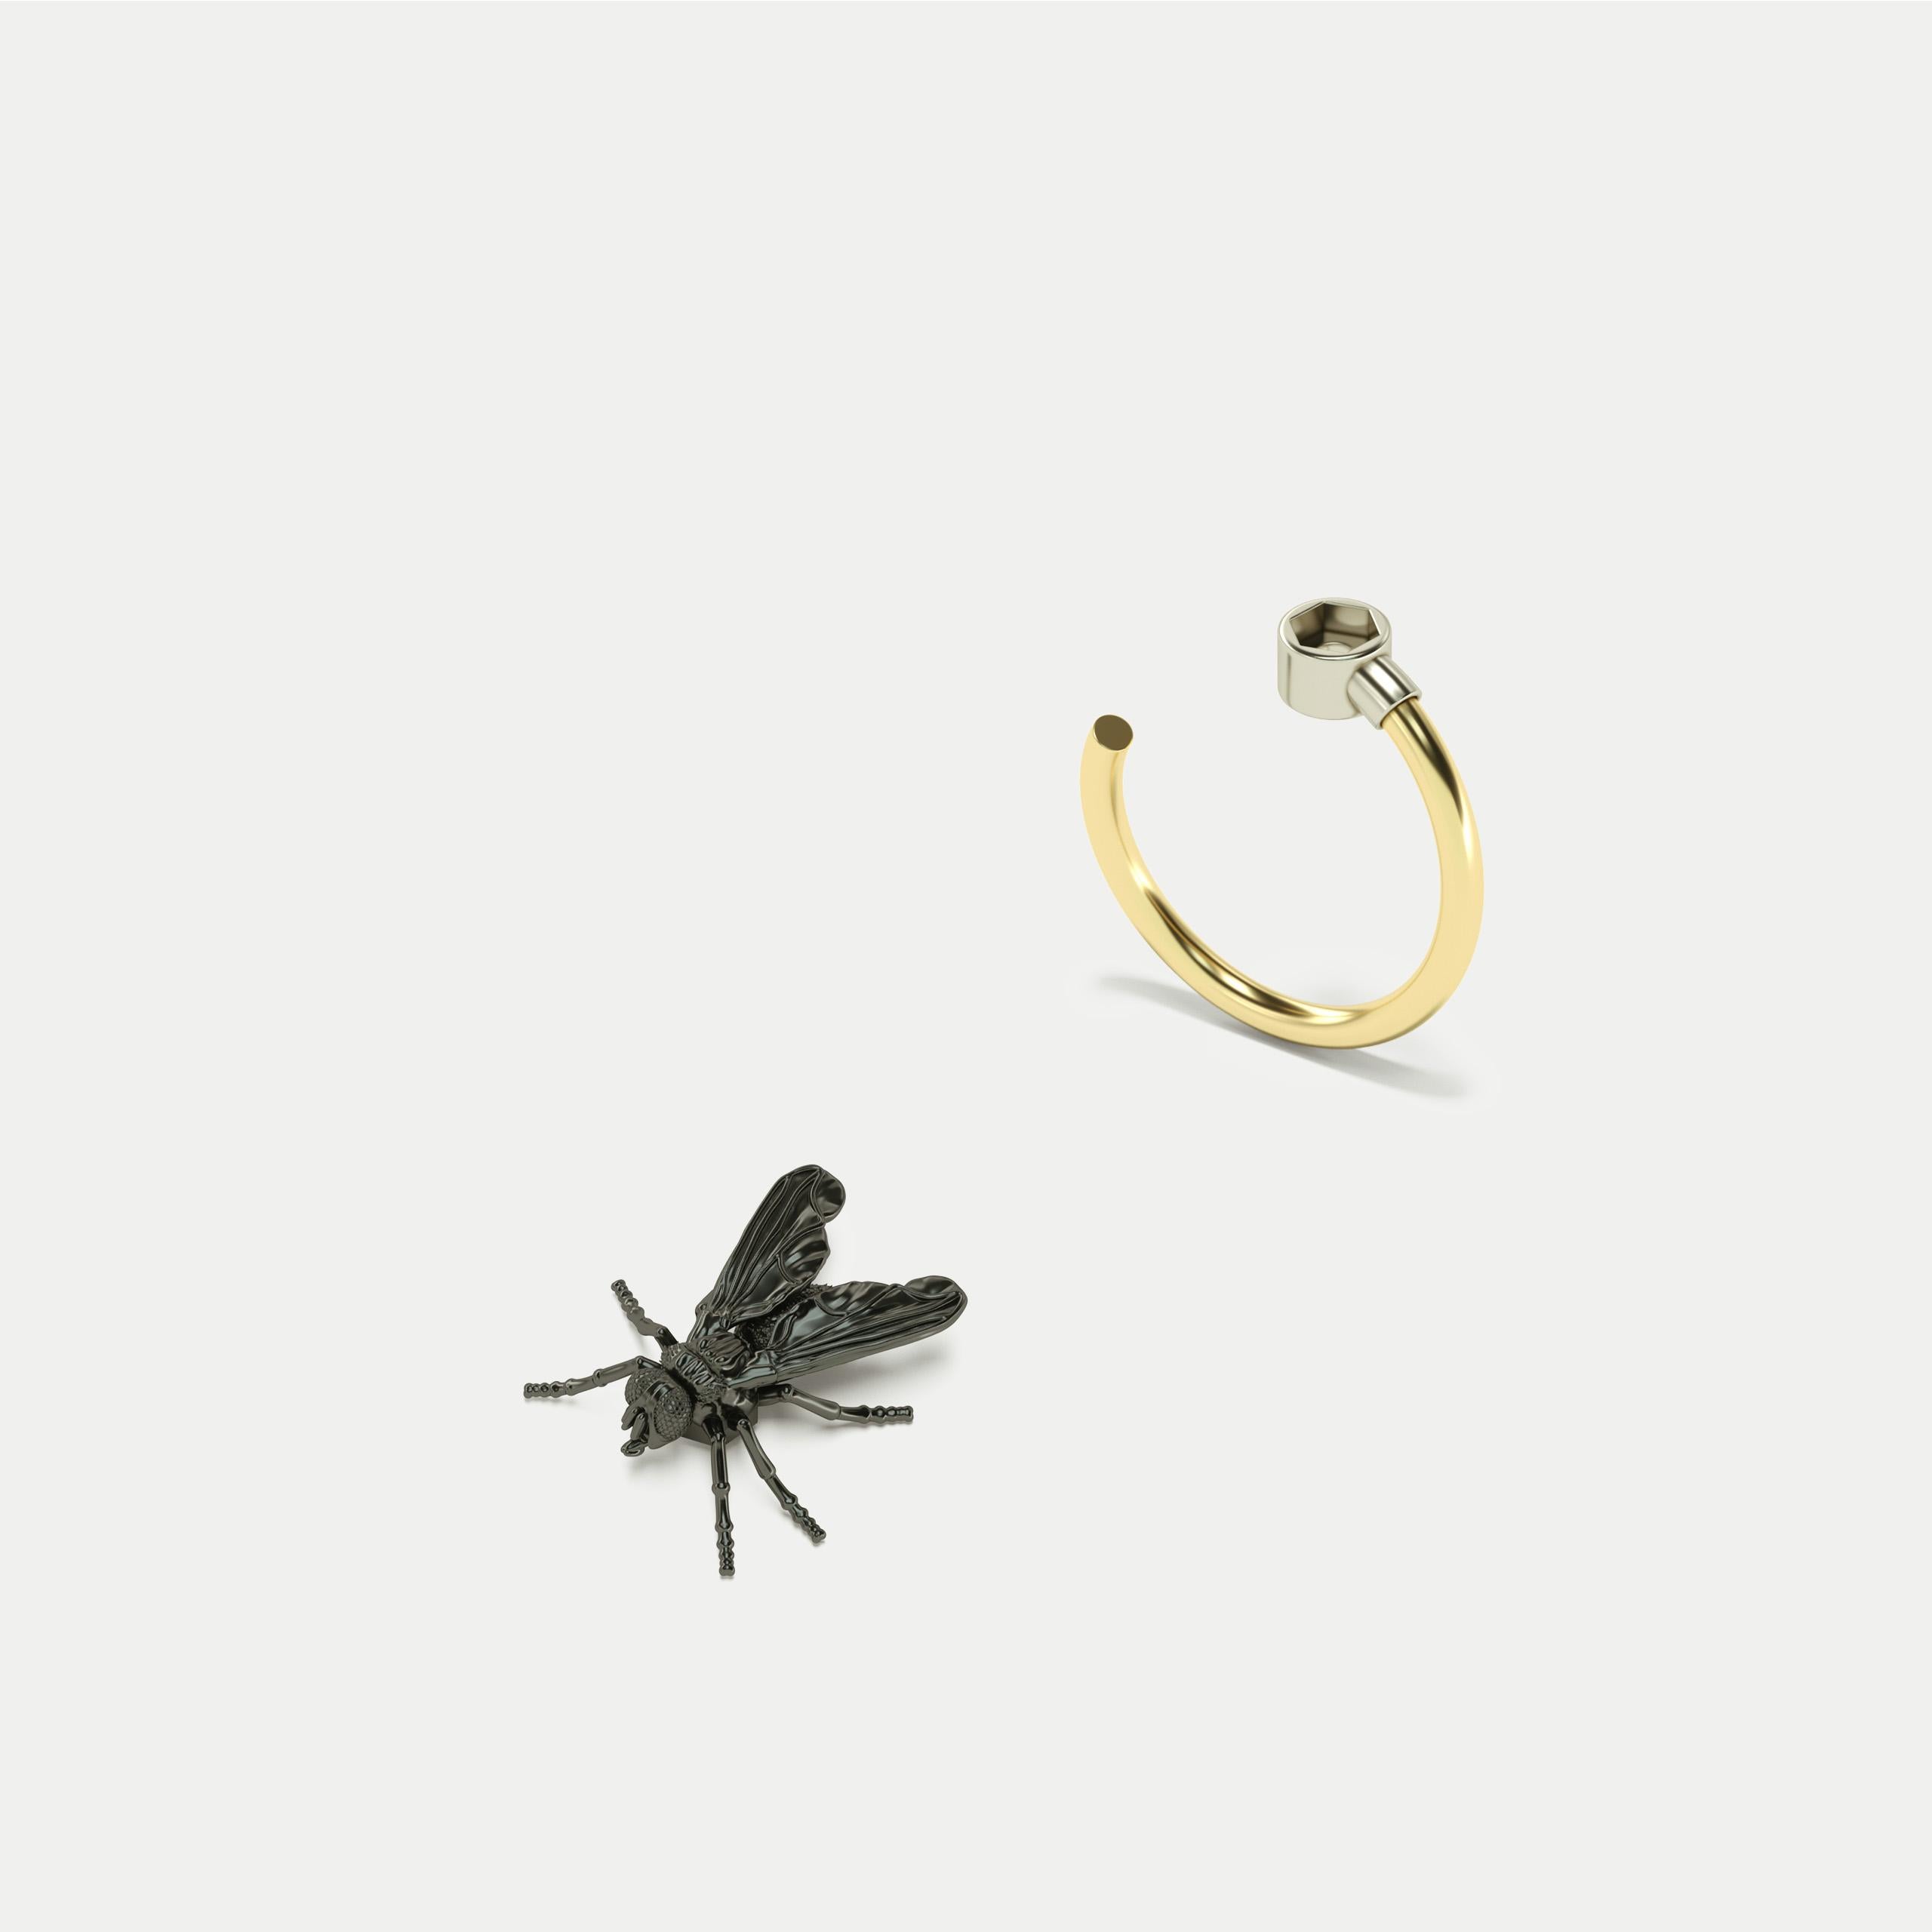 Product recommended by Tan France
- 18K Yellow Gold Ring
- 18K Black Gold Fly

You can mount or dismount the Ring Fly. The ECH surgical steel screwing system allows you to easily and reliably mount decorative elements on the basic piece of